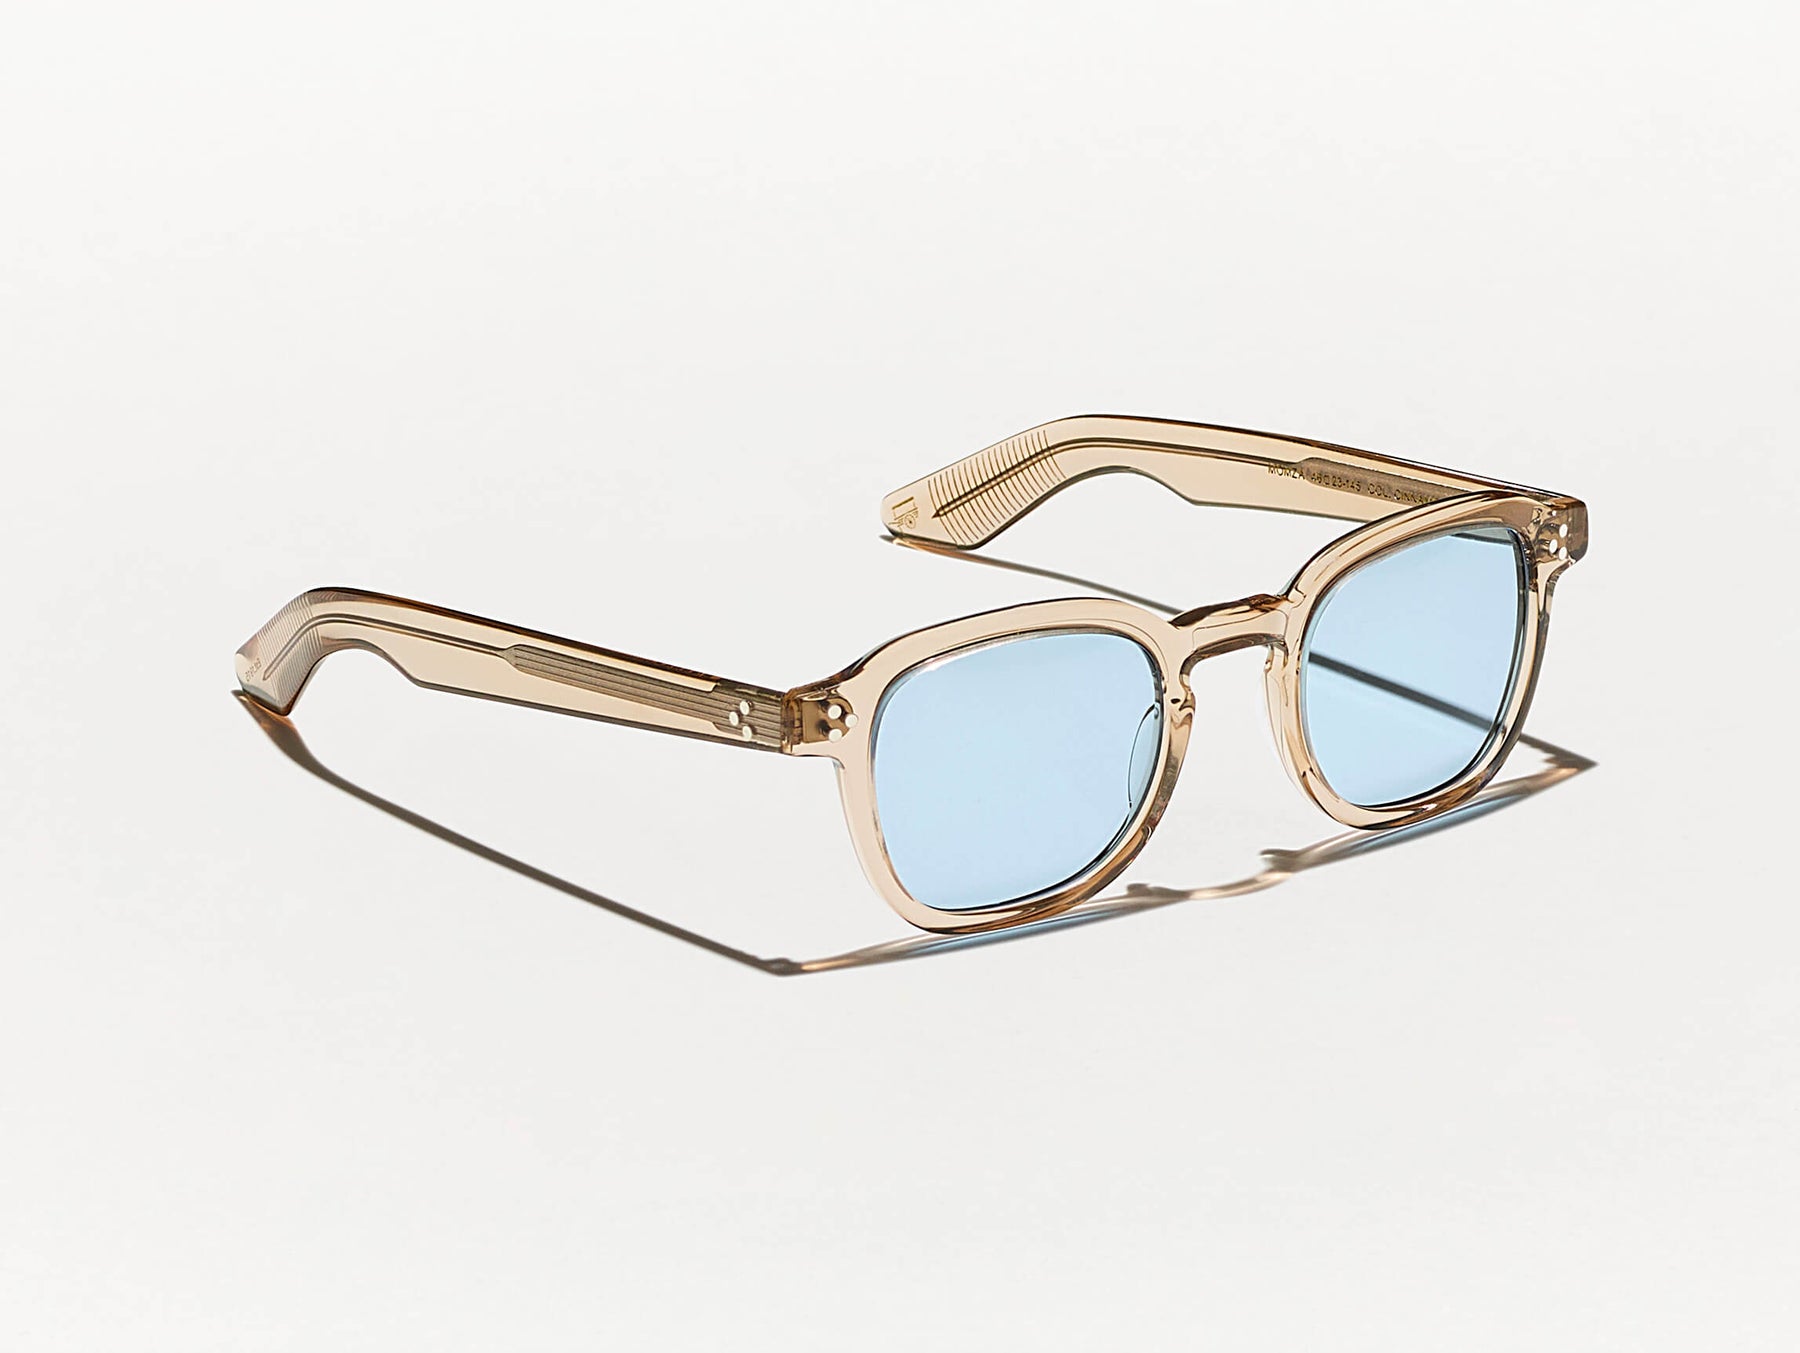 The MOMZA Pastel with Bel Air Blue Tinted Lenses